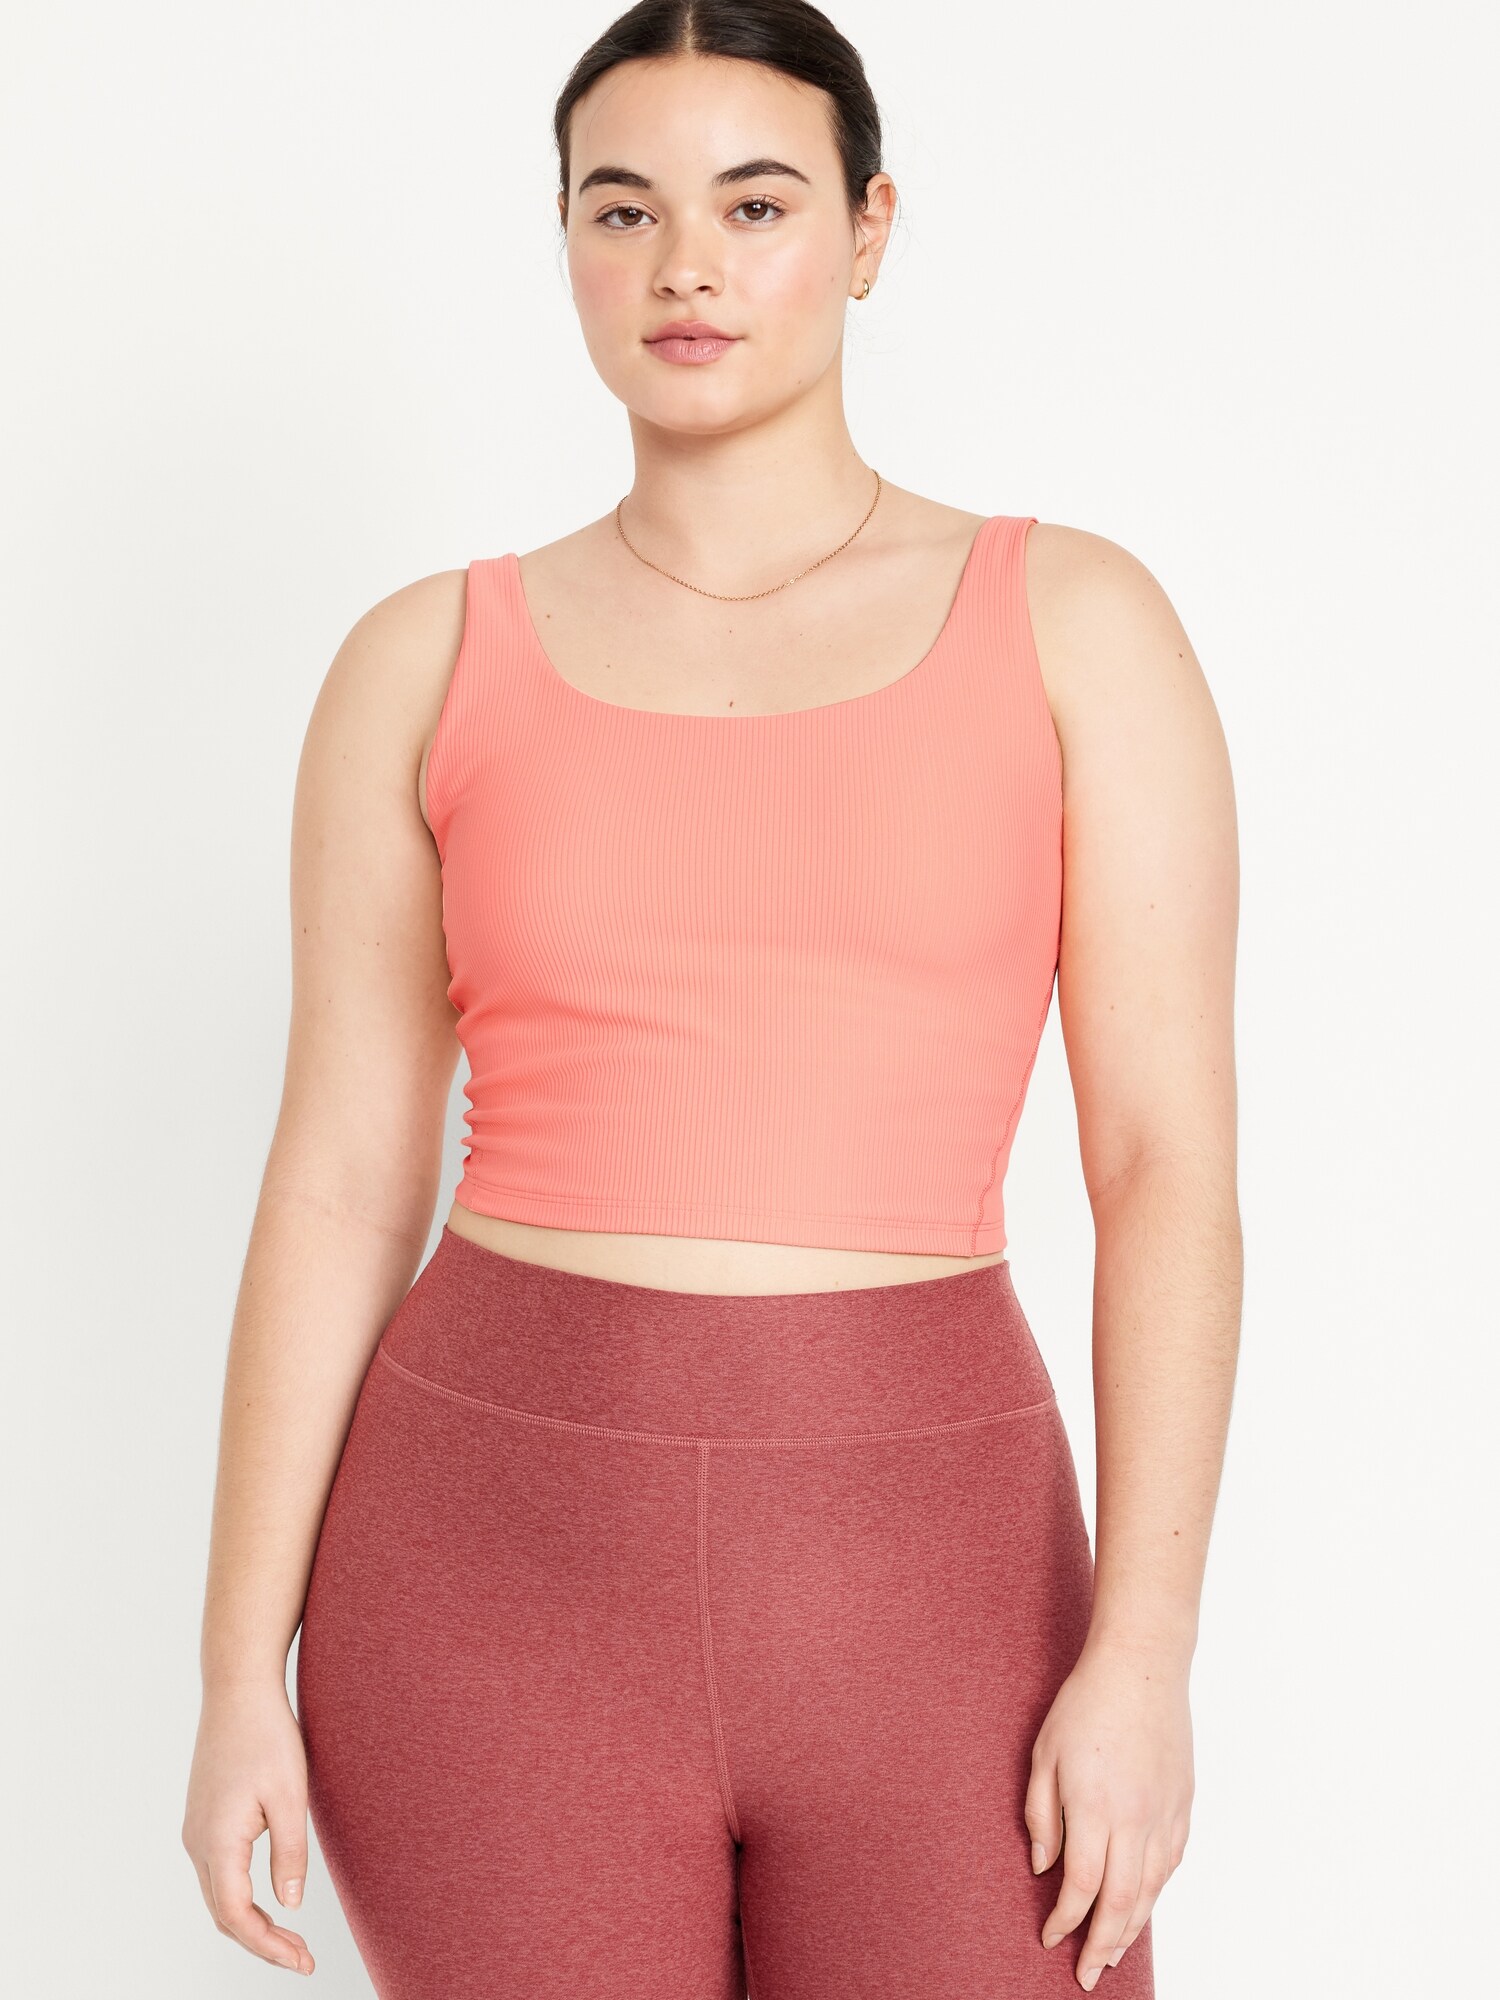 Old Navy Women's Light Support PowerSoft Longline Sports Bra Coral